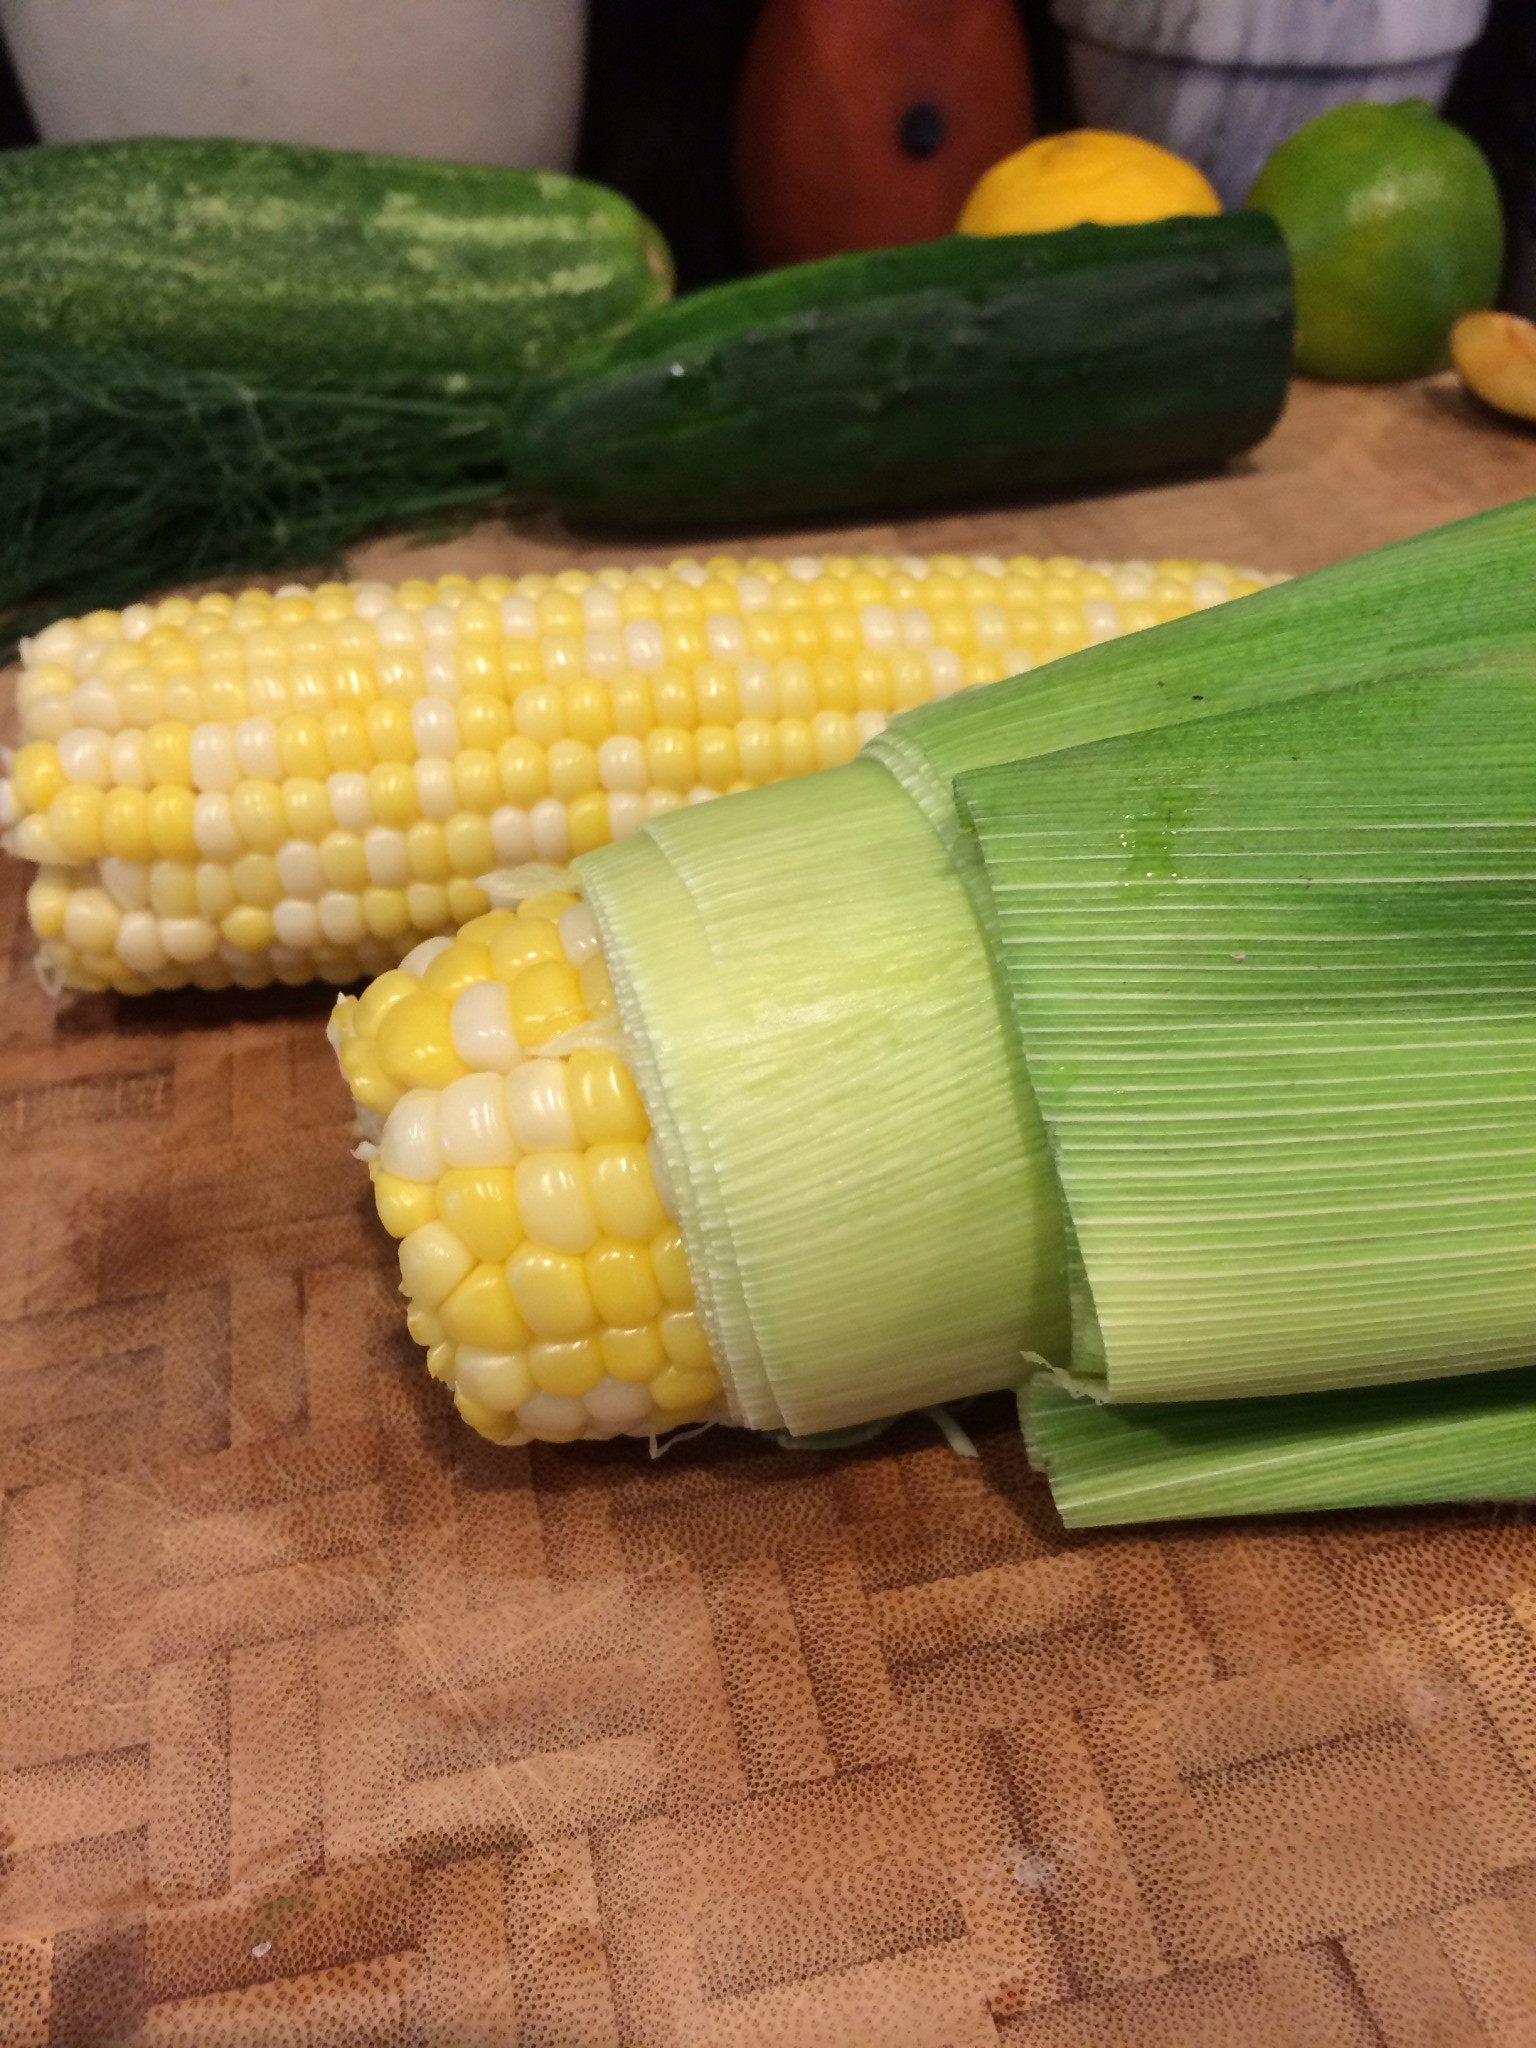 Microwave Corn On Cob In Husk
 microwave corn on the cob without husk recipe